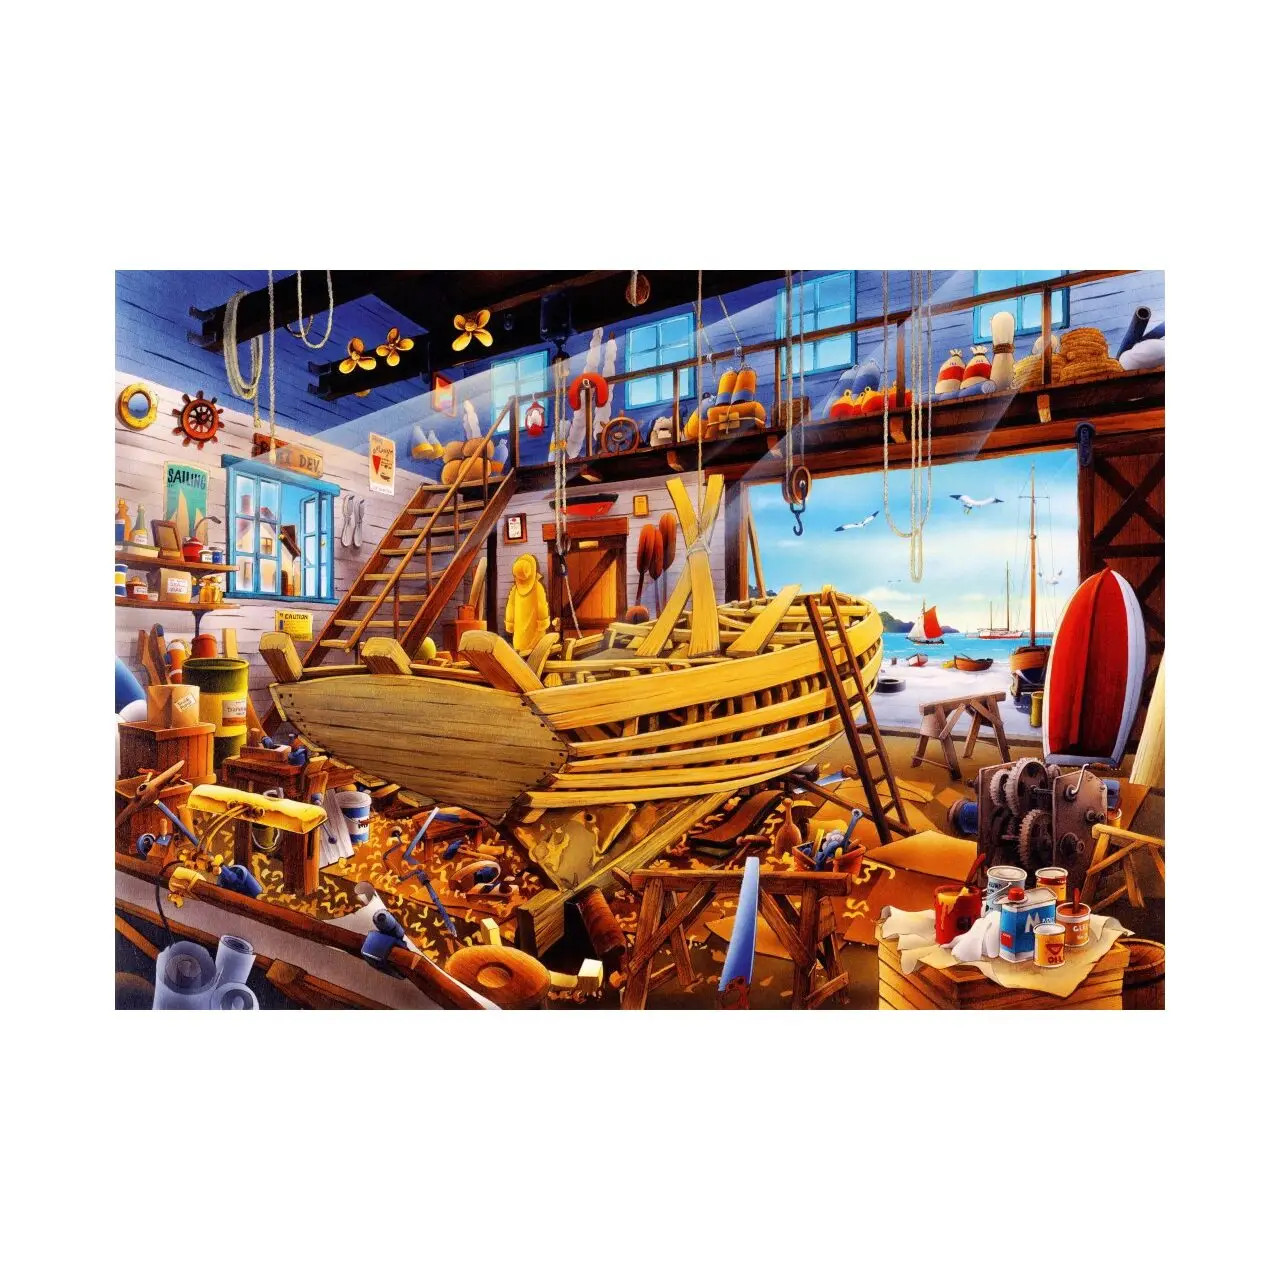 Puzzle Bootswerft 1000 Teile